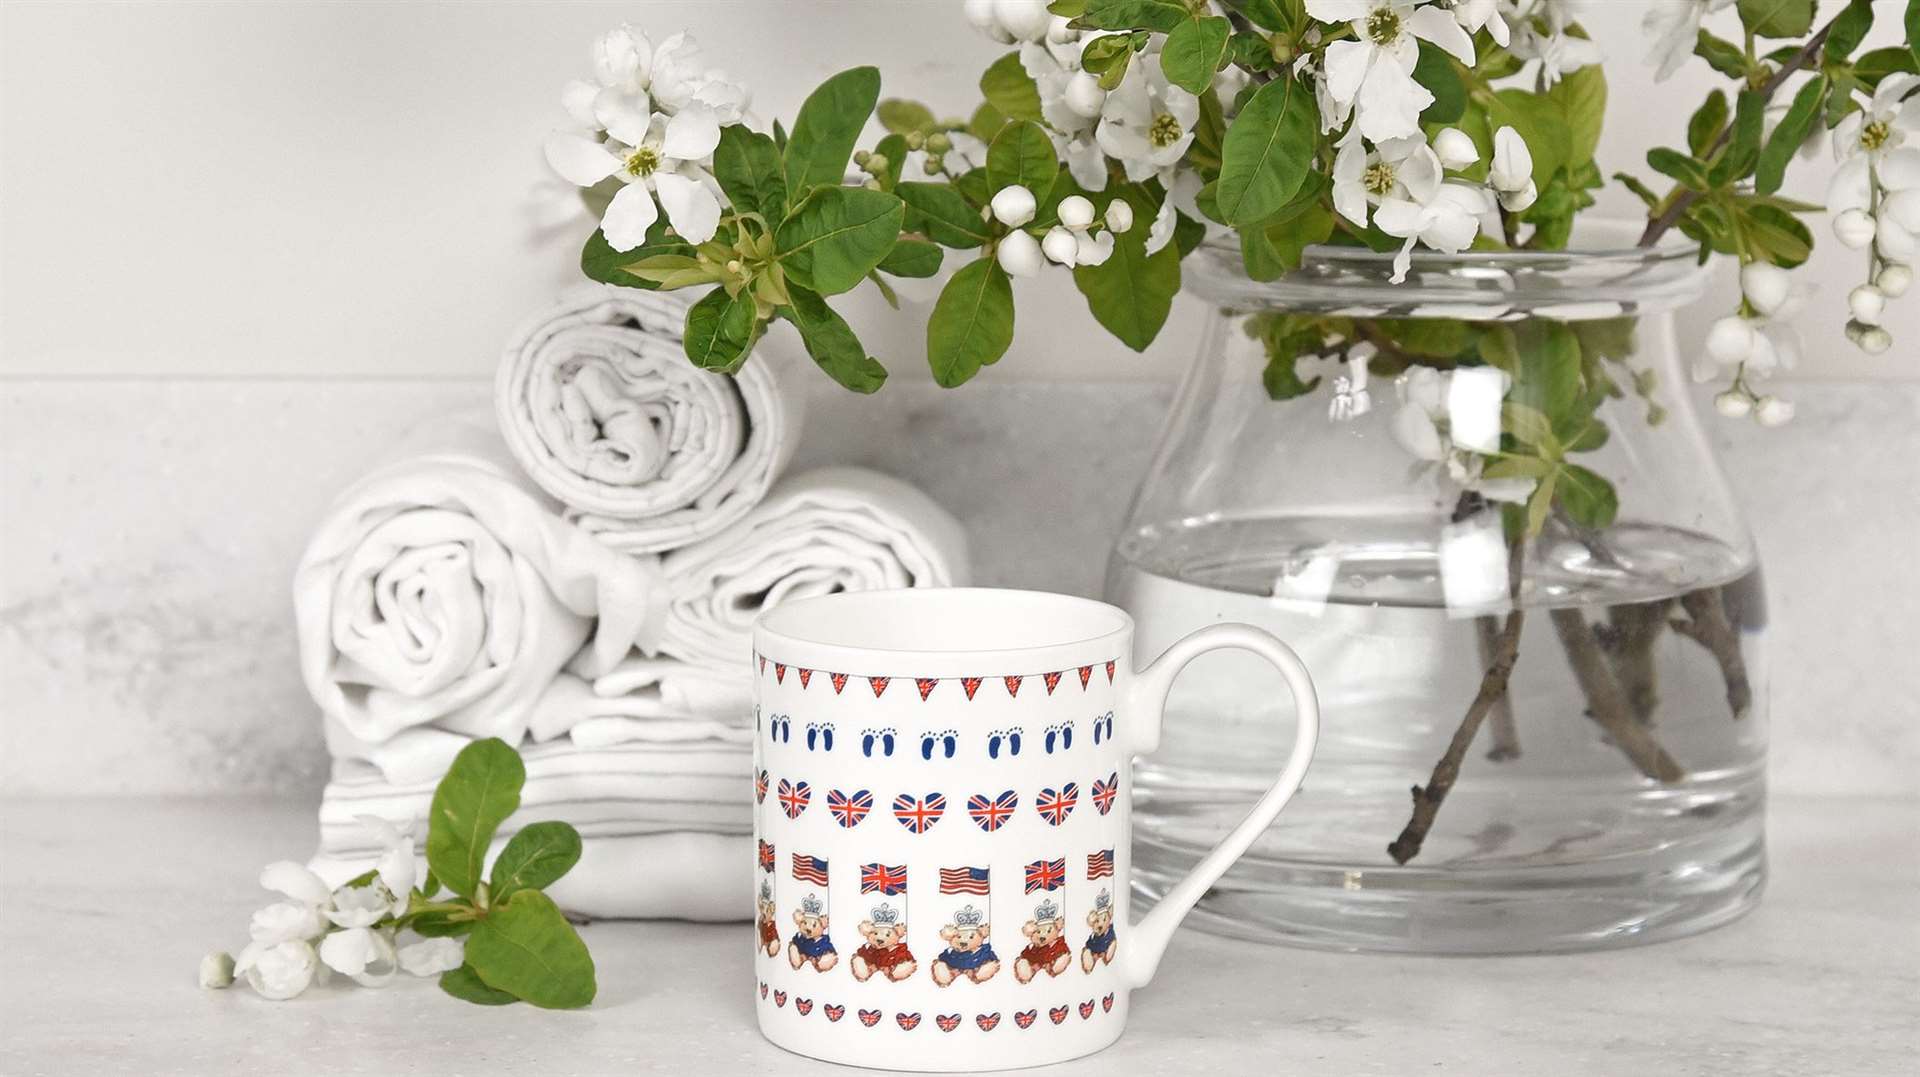 Archie's mug included a nod to both side of his heritage when it featured both the Union and American flag. Image: Sophie Allport.